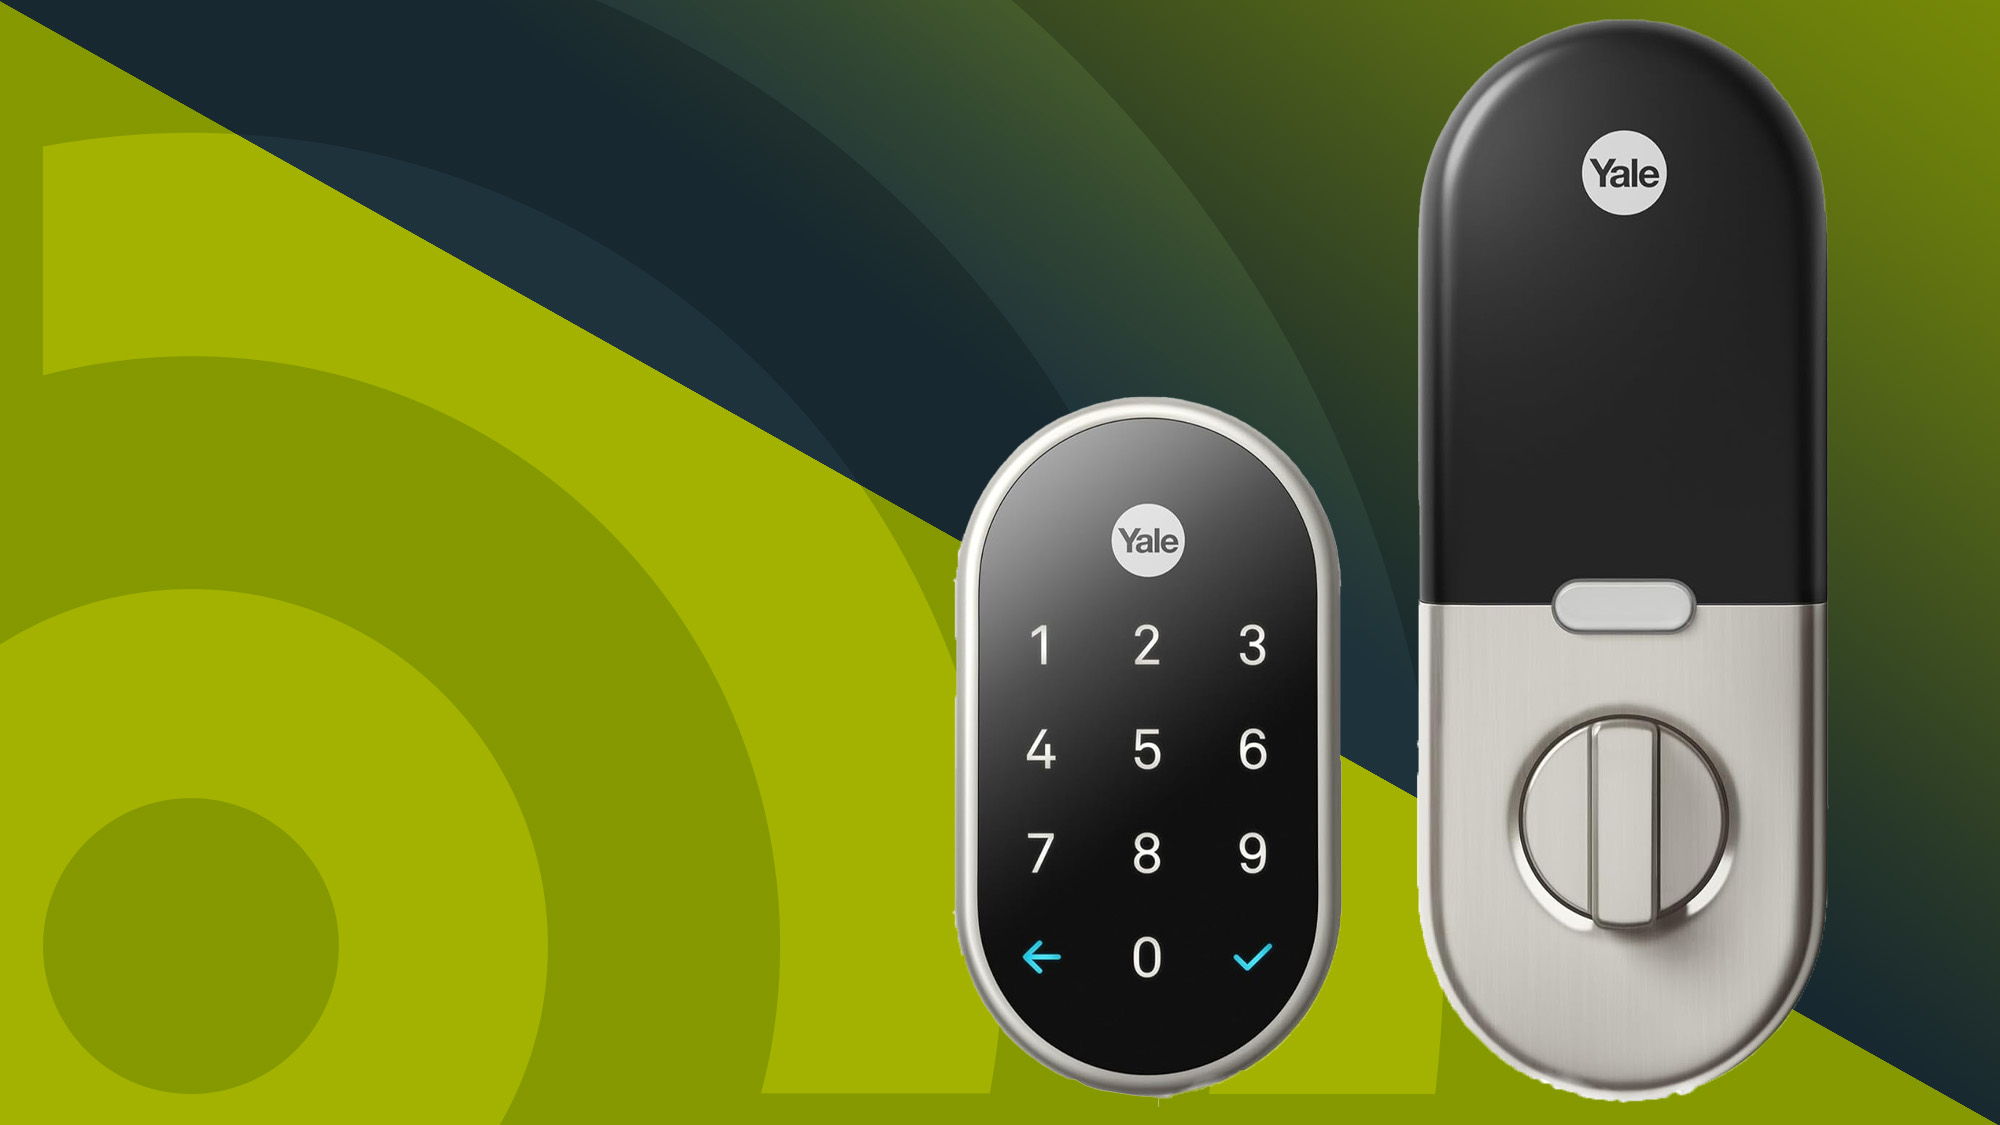 Nuki Smart Lock with Matter now available, Products